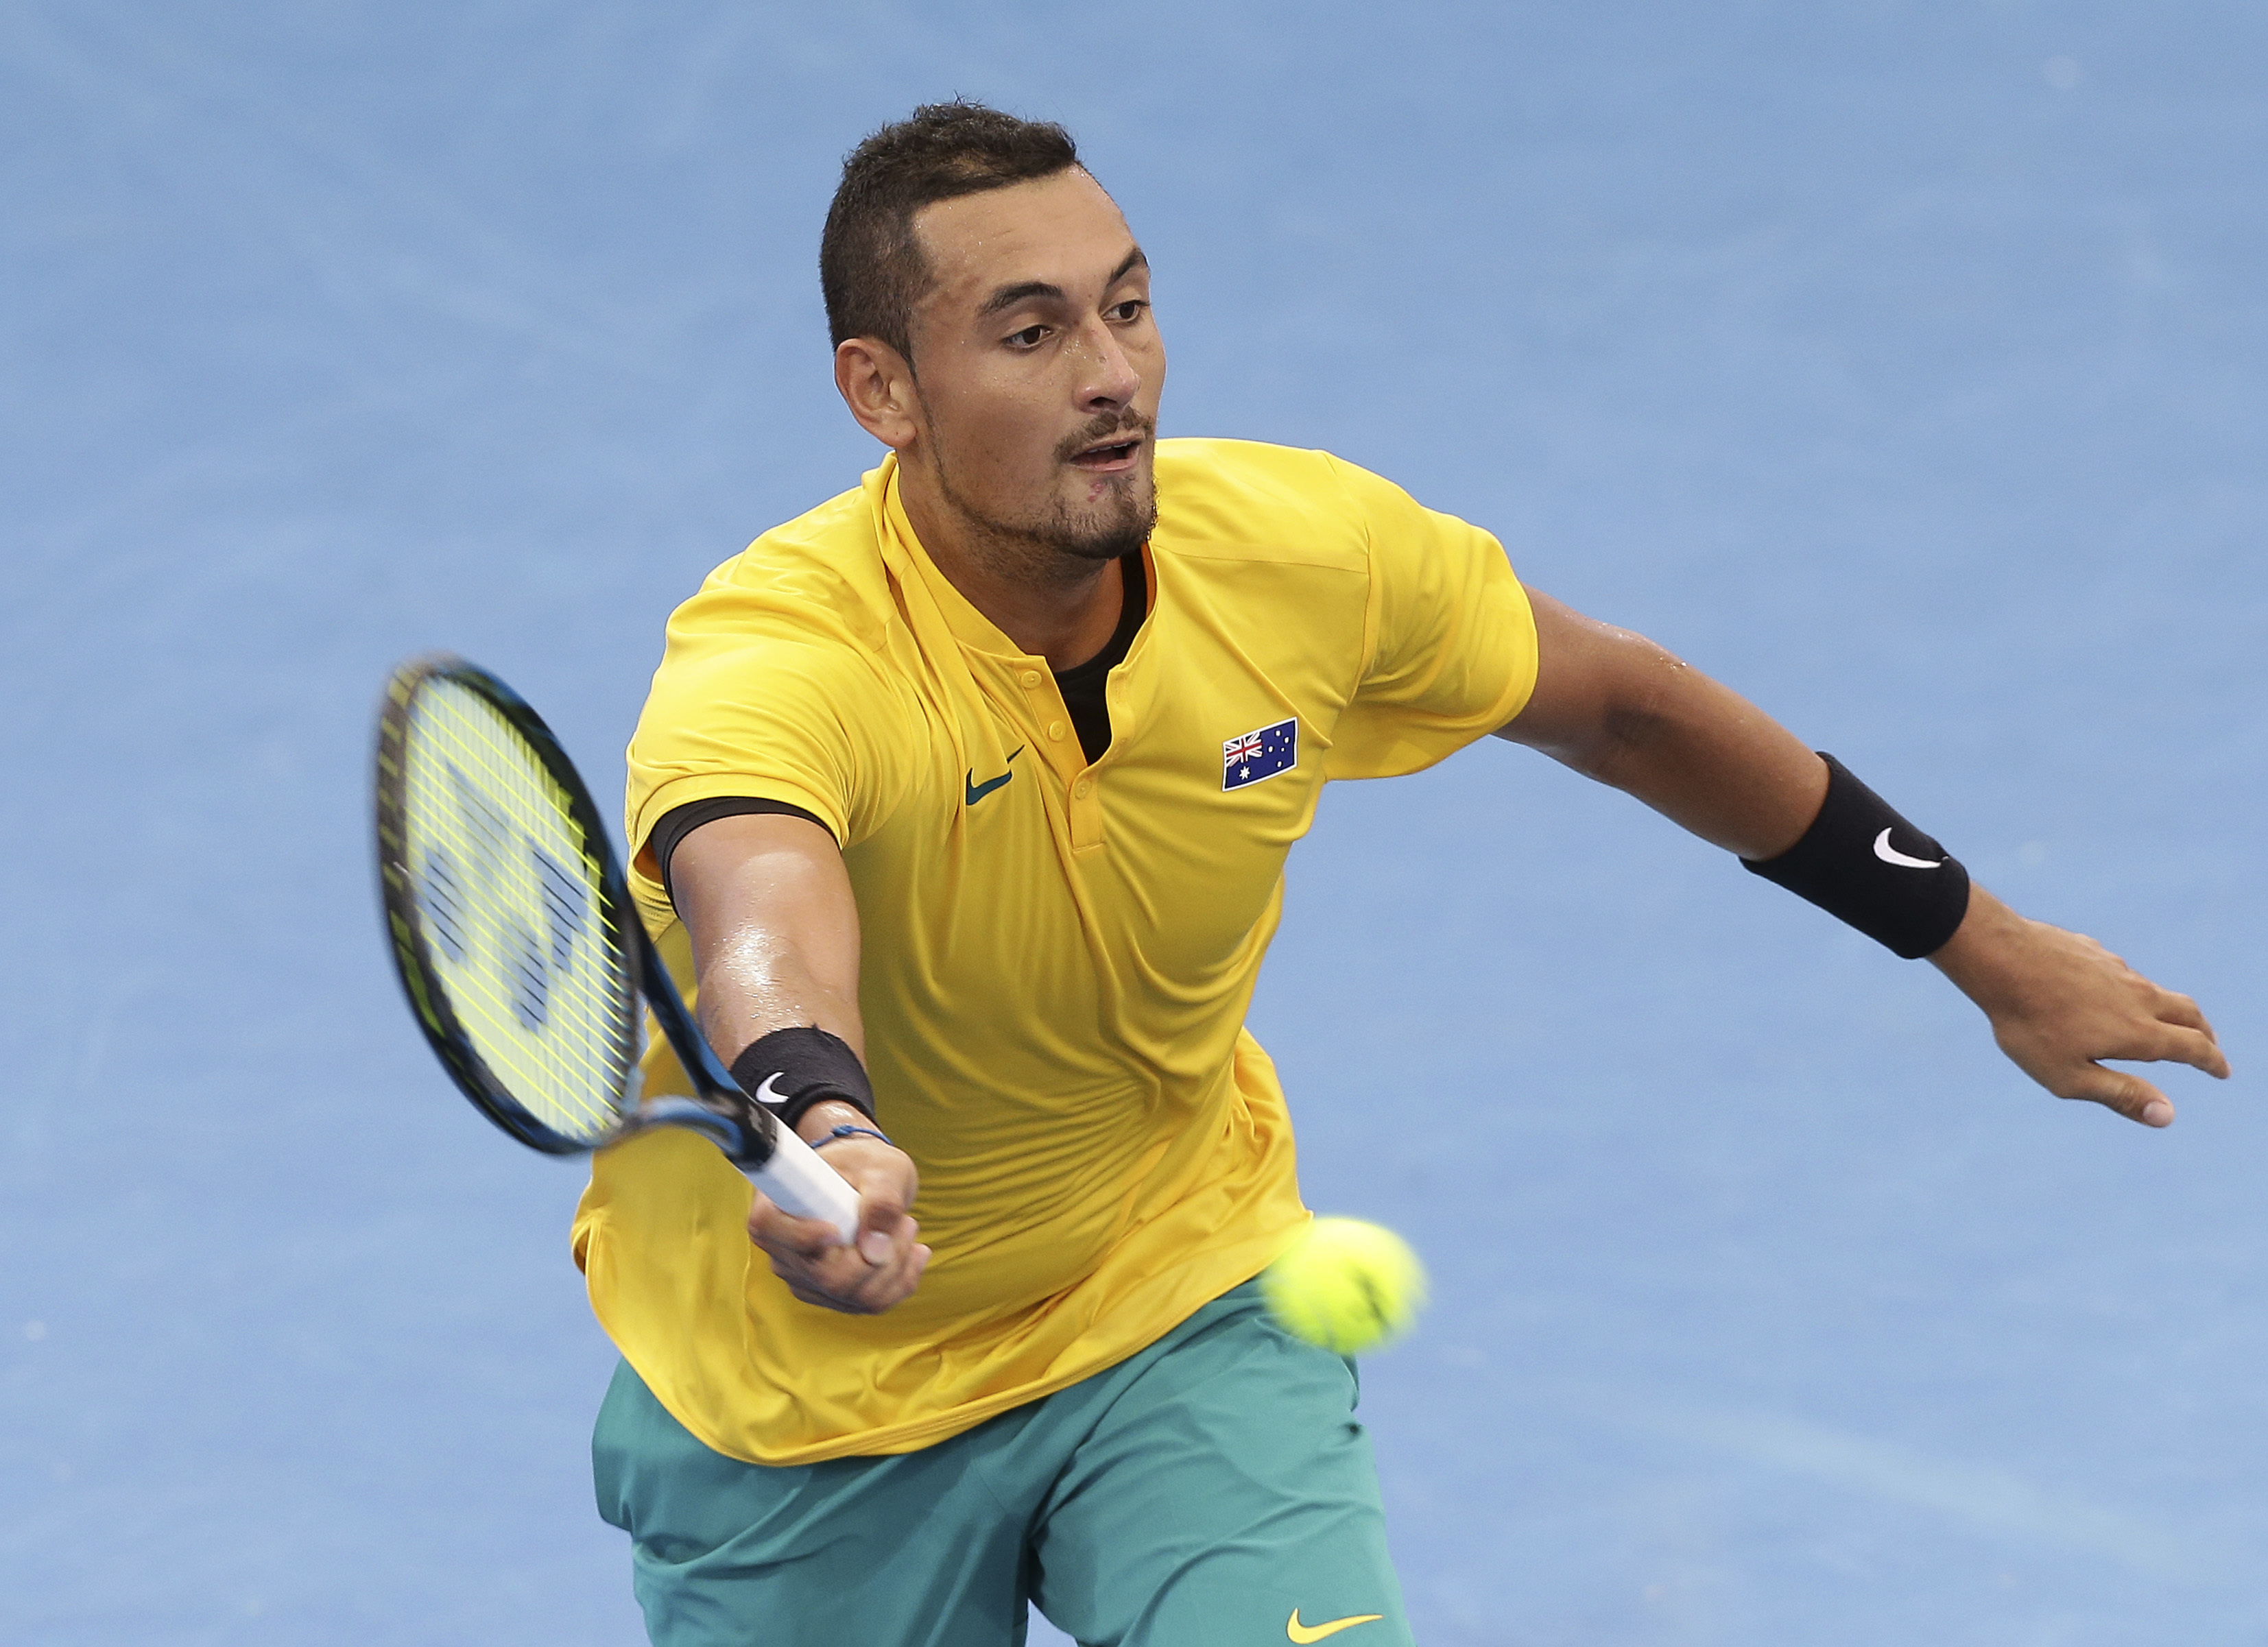 Seeking rest and recuperation, Nick Kyrgios won’t play Monte Carlo